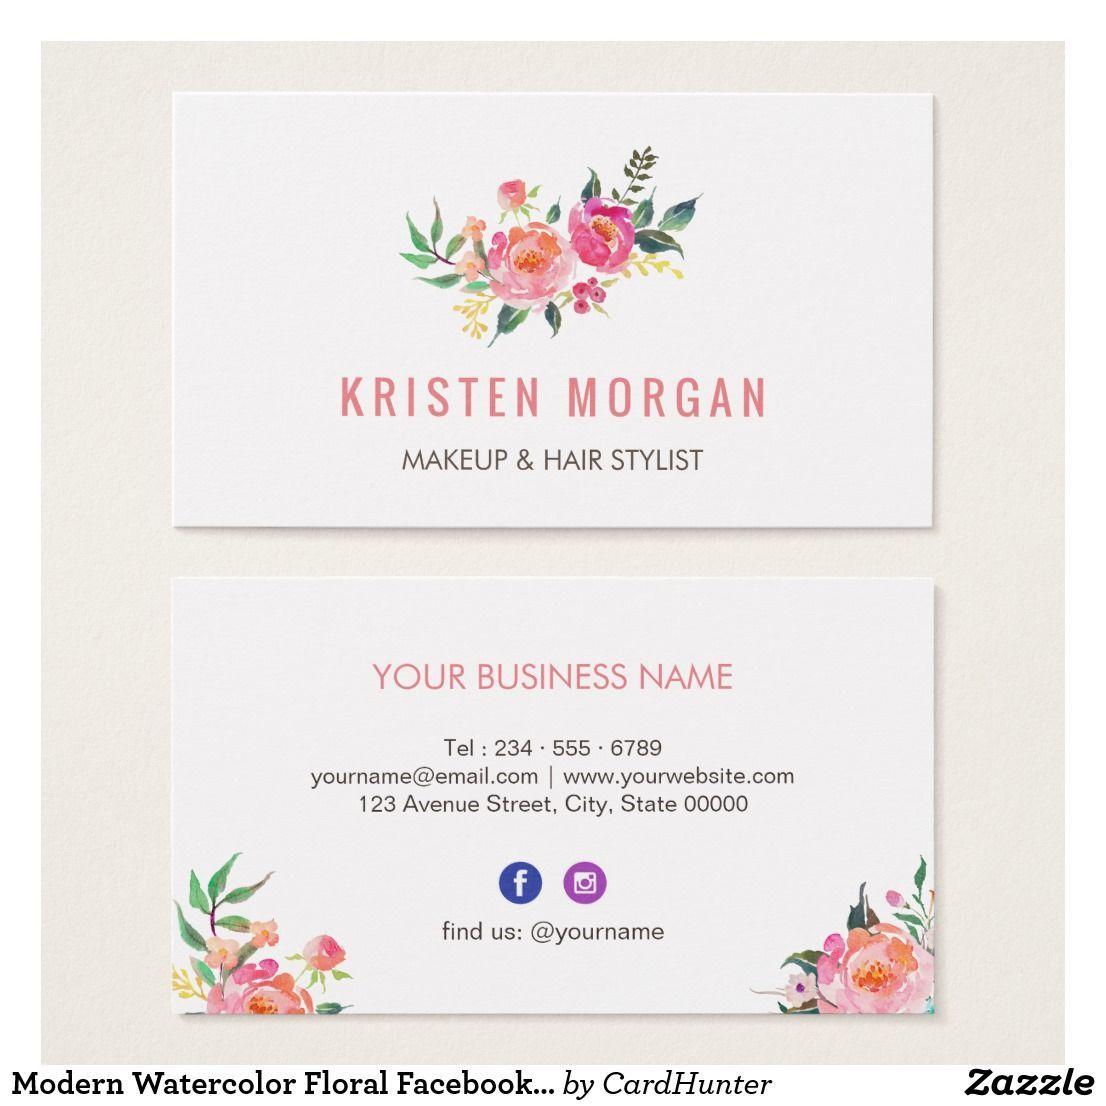 Facebook and Instagram for Business Card Logo - Modern Watercolor Floral Facebook Instagram Icon Business Card ...